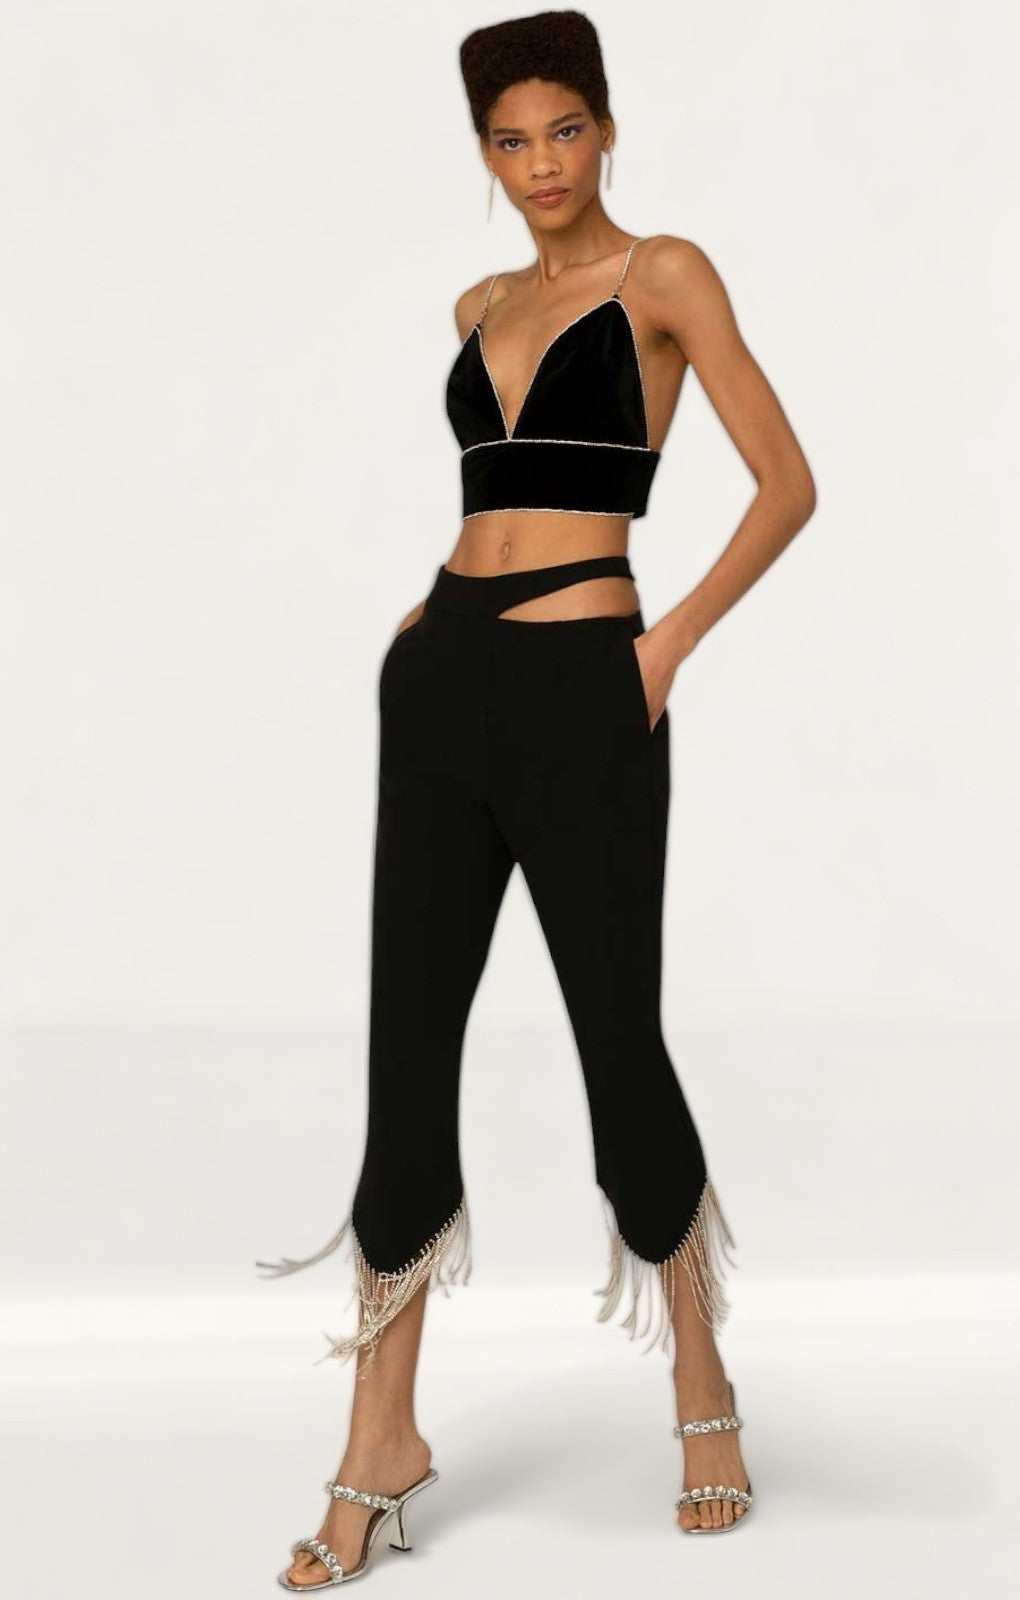 Amy Lynn Marcella Diamante Crop Top & Prince Diamante Fringe Trousers product image